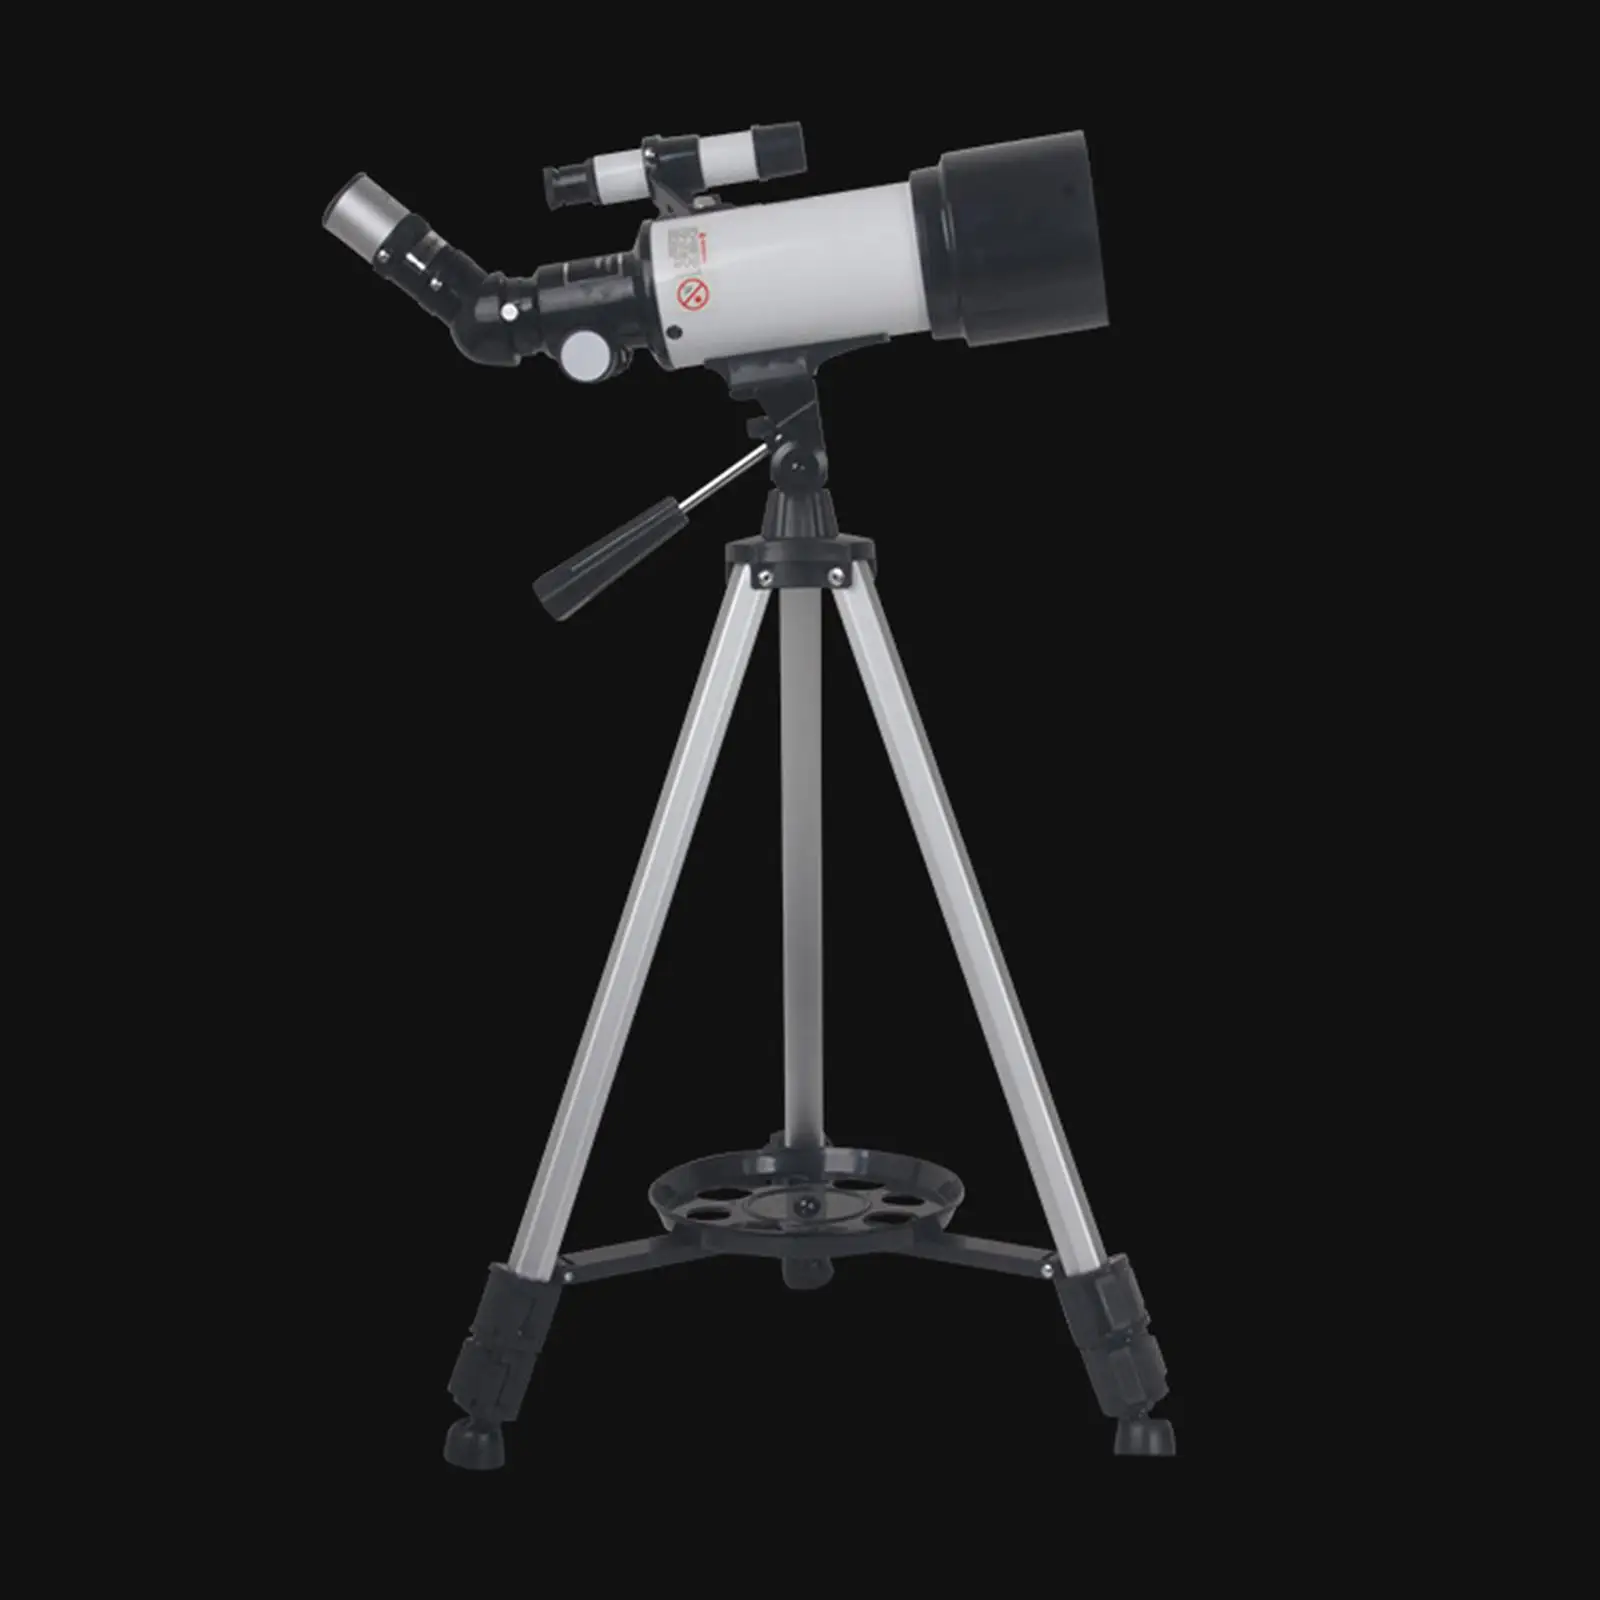 70mm Aperture 400mm Focal Length Telescope with Tripod for Beginners with 10mm, 25mm Eyepieces Durable Accessories Professional